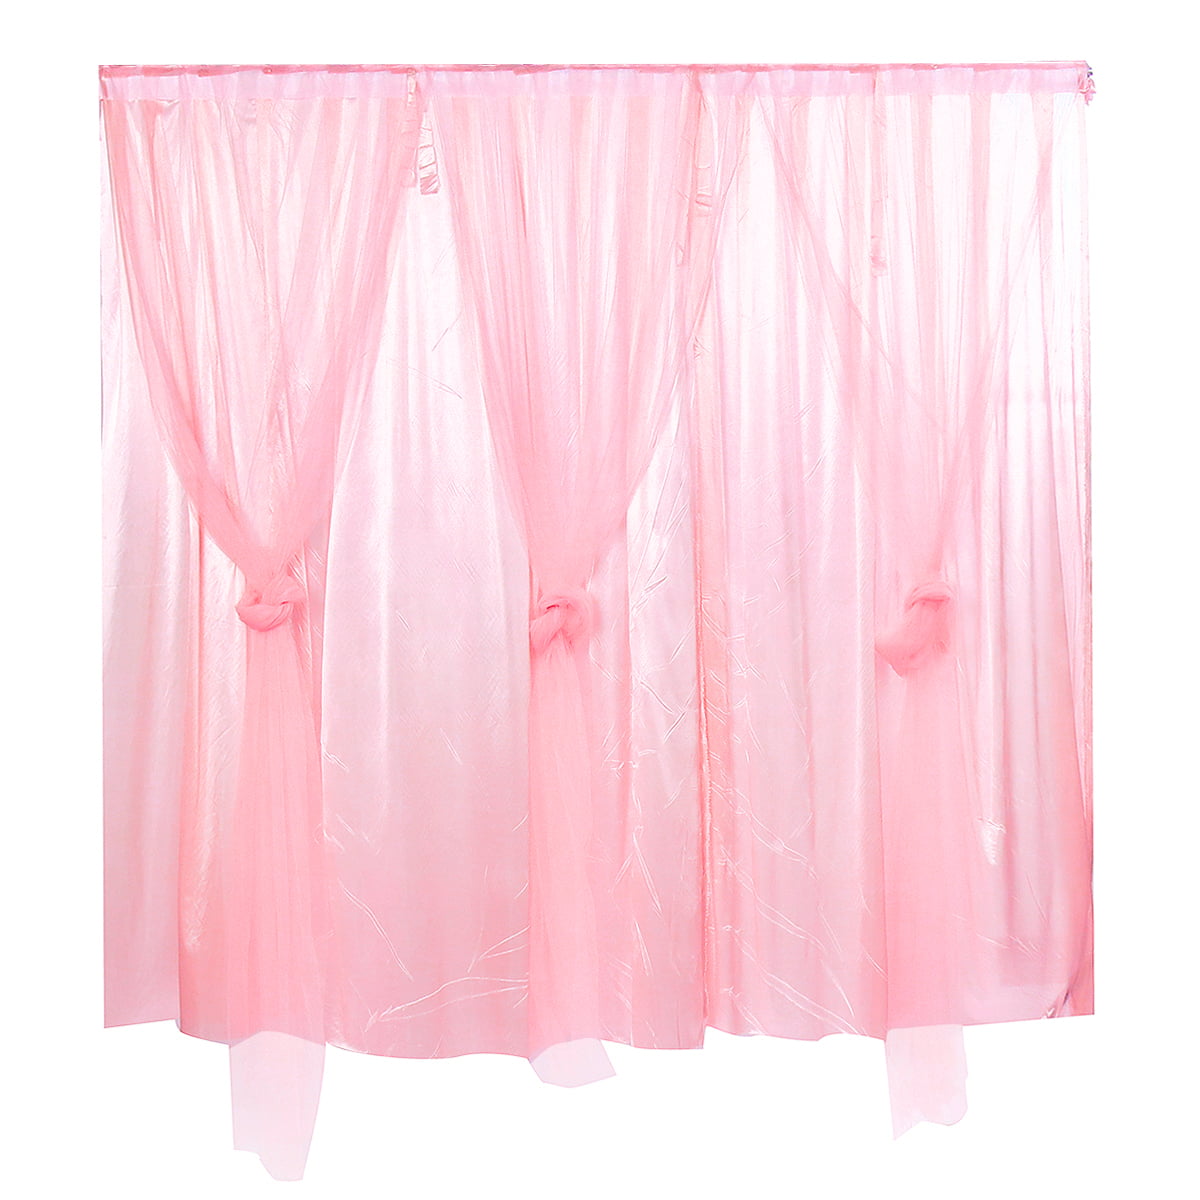 Details about   10x20ft Colorful drapes wedding stage back curtains fashion cheap silk backdrops 